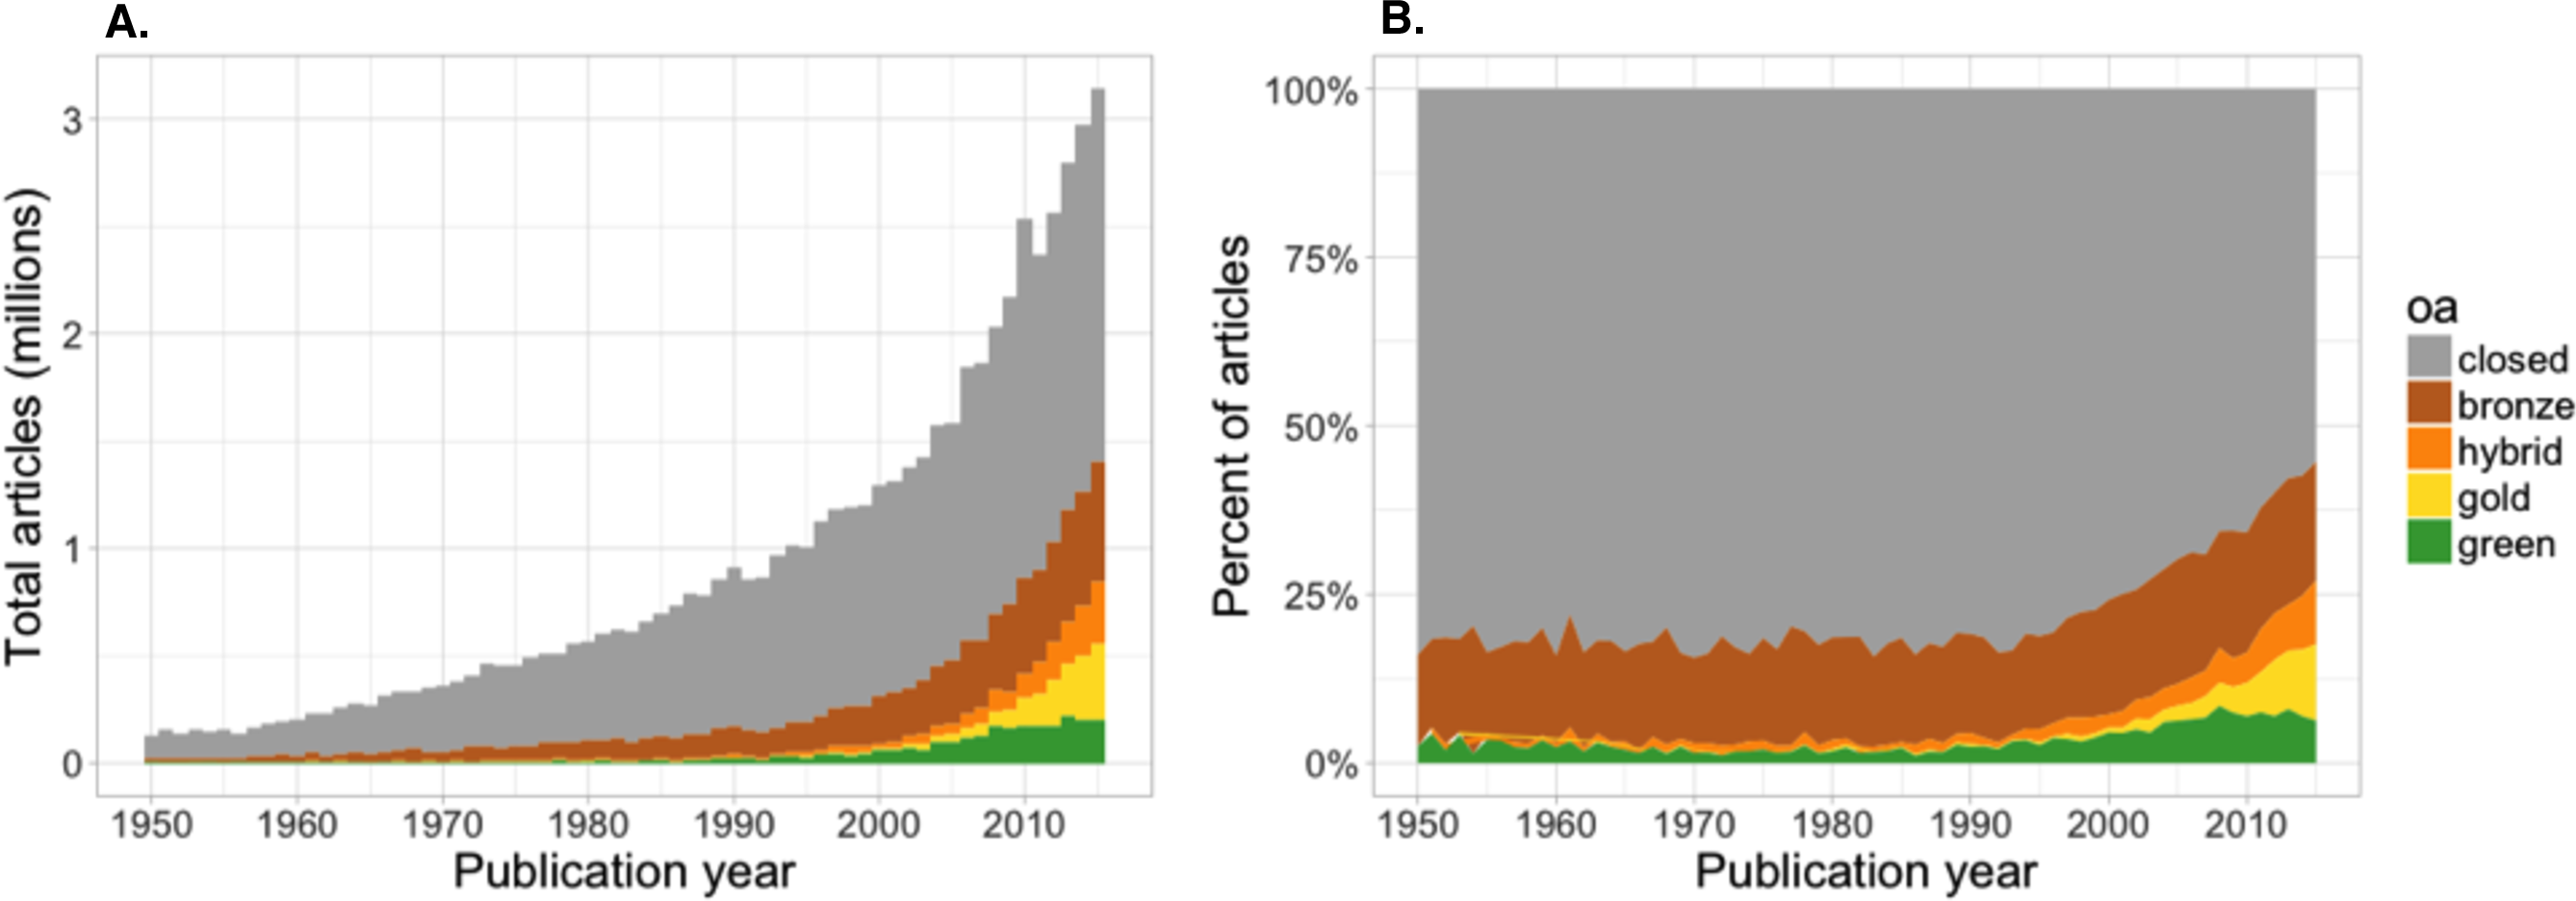 The number and proportion of open access articles split between Gold, Green, Hybrid, Bronze and closed access [from 1950 - 2016; @piwowar2018]. To learn about the open access classification system, see [here](https://en.wikipedia.org/wiki/Open_access).